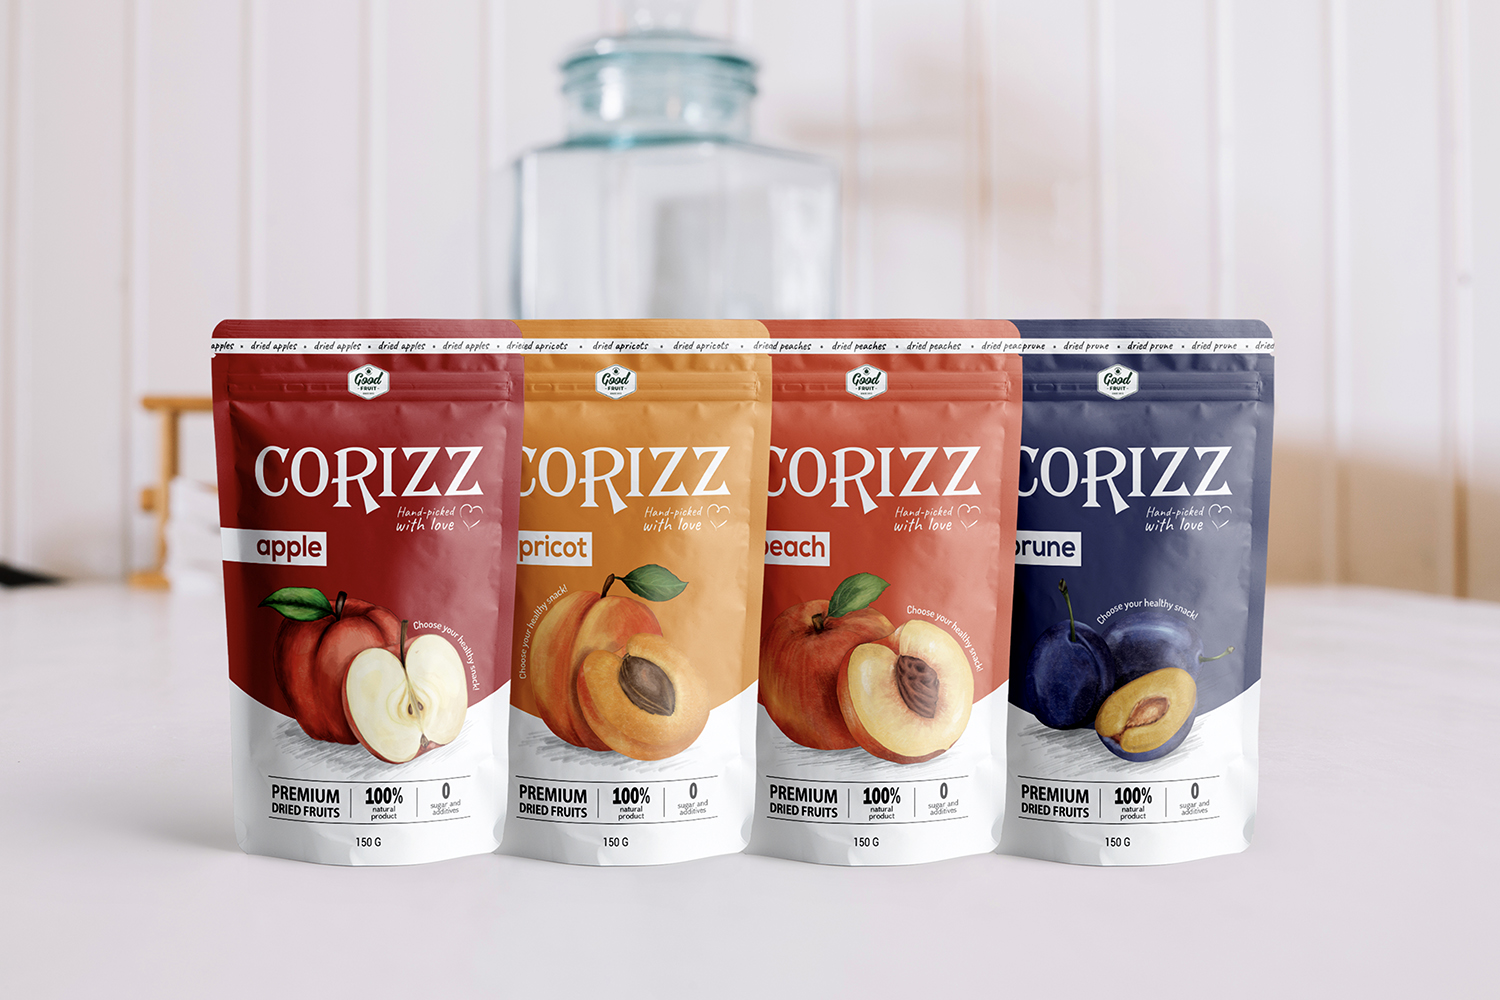 Branding and Packaging Corizz Dried Fruits by Well PR Studio